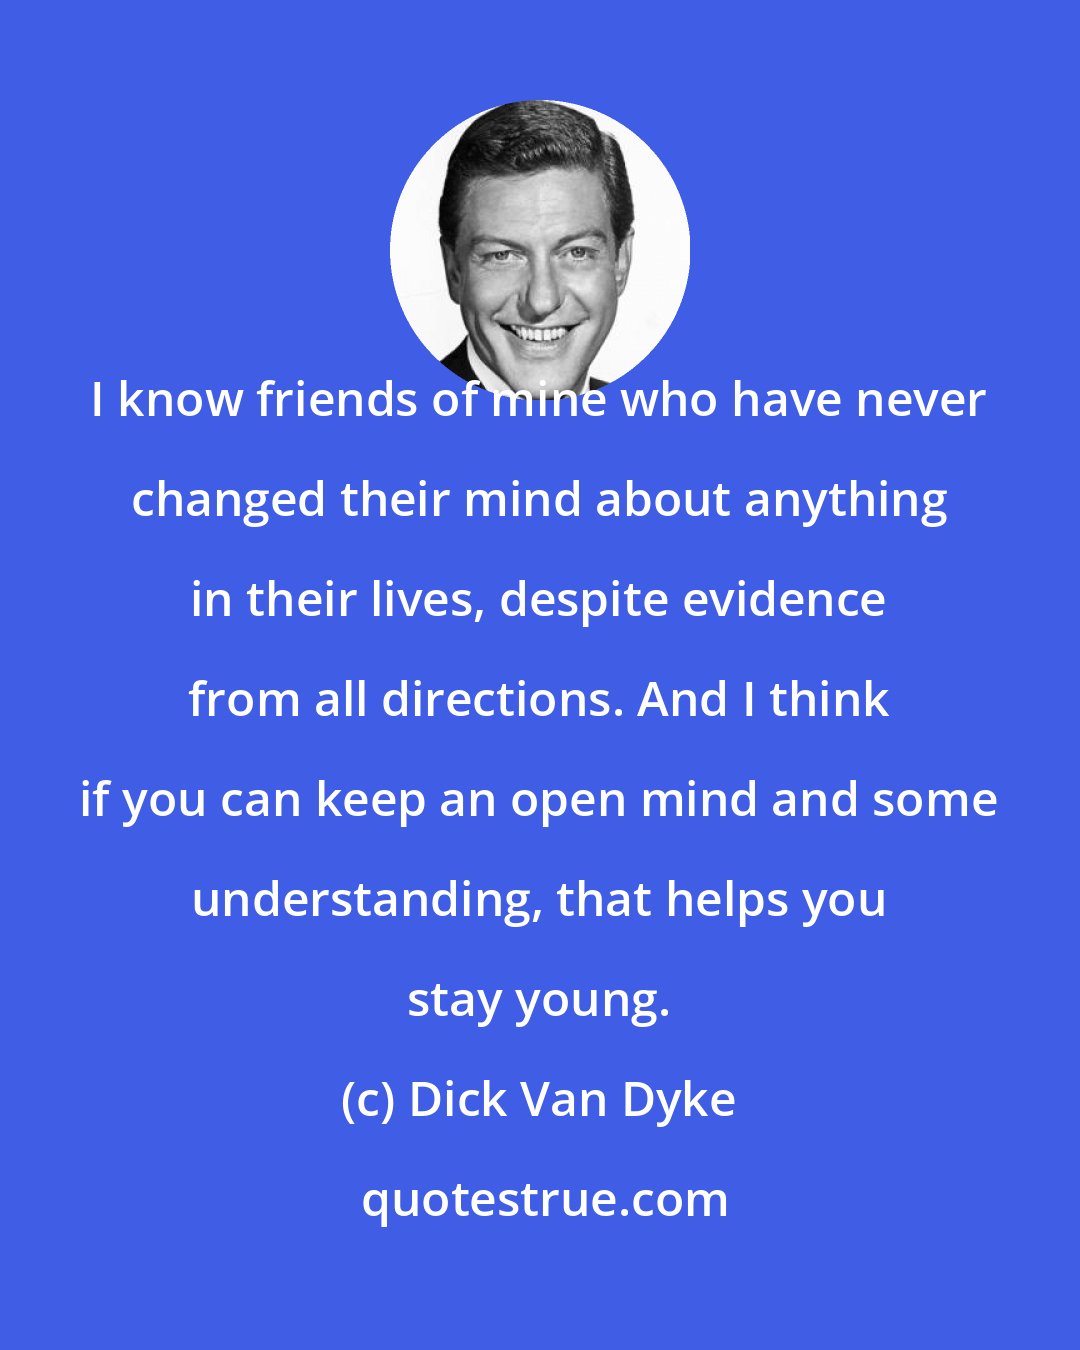 Dick Van Dyke: I know friends of mine who have never changed their mind about anything in their lives, despite evidence from all directions. And I think if you can keep an open mind and some understanding, that helps you stay young.